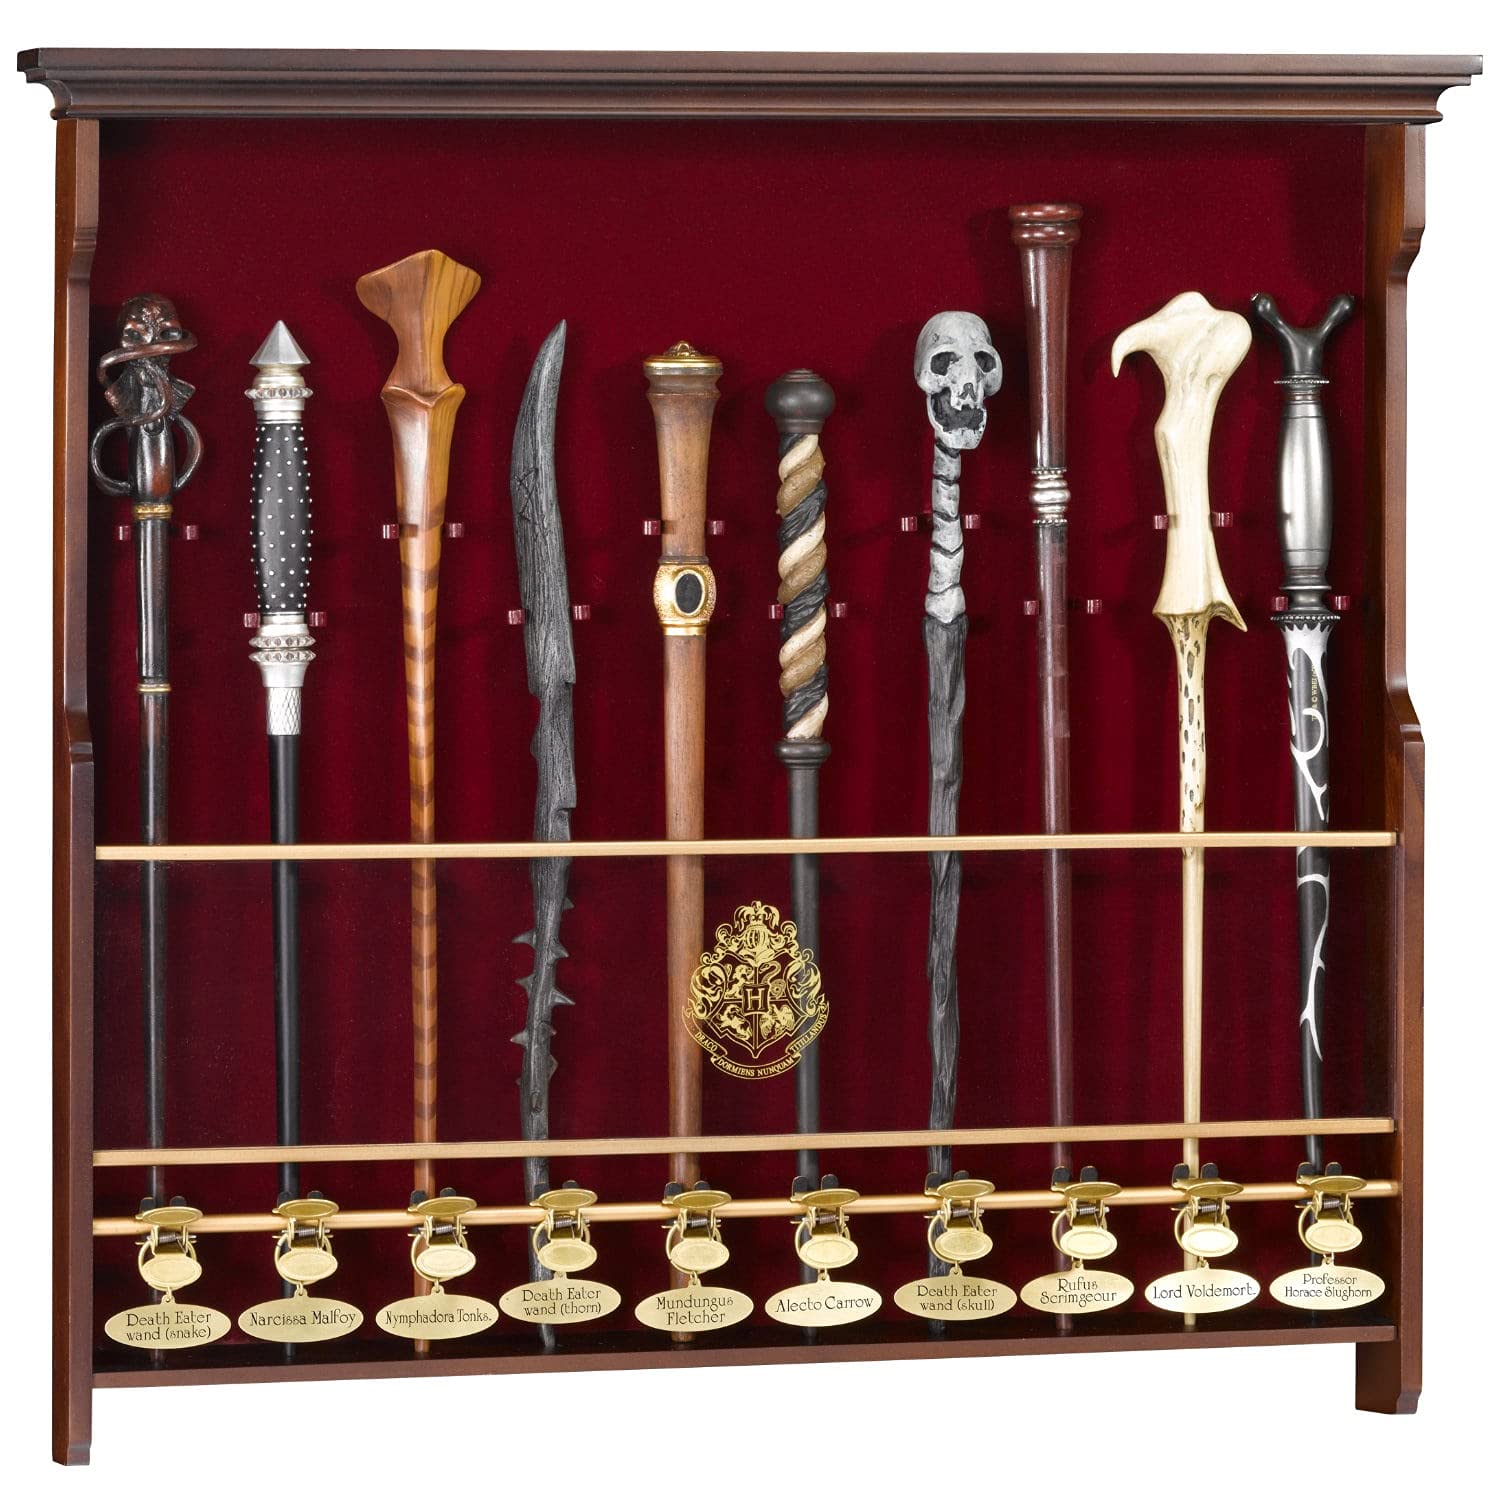 The Noble Collection Harry Potter Ten Character Wand Display Wands Not Included